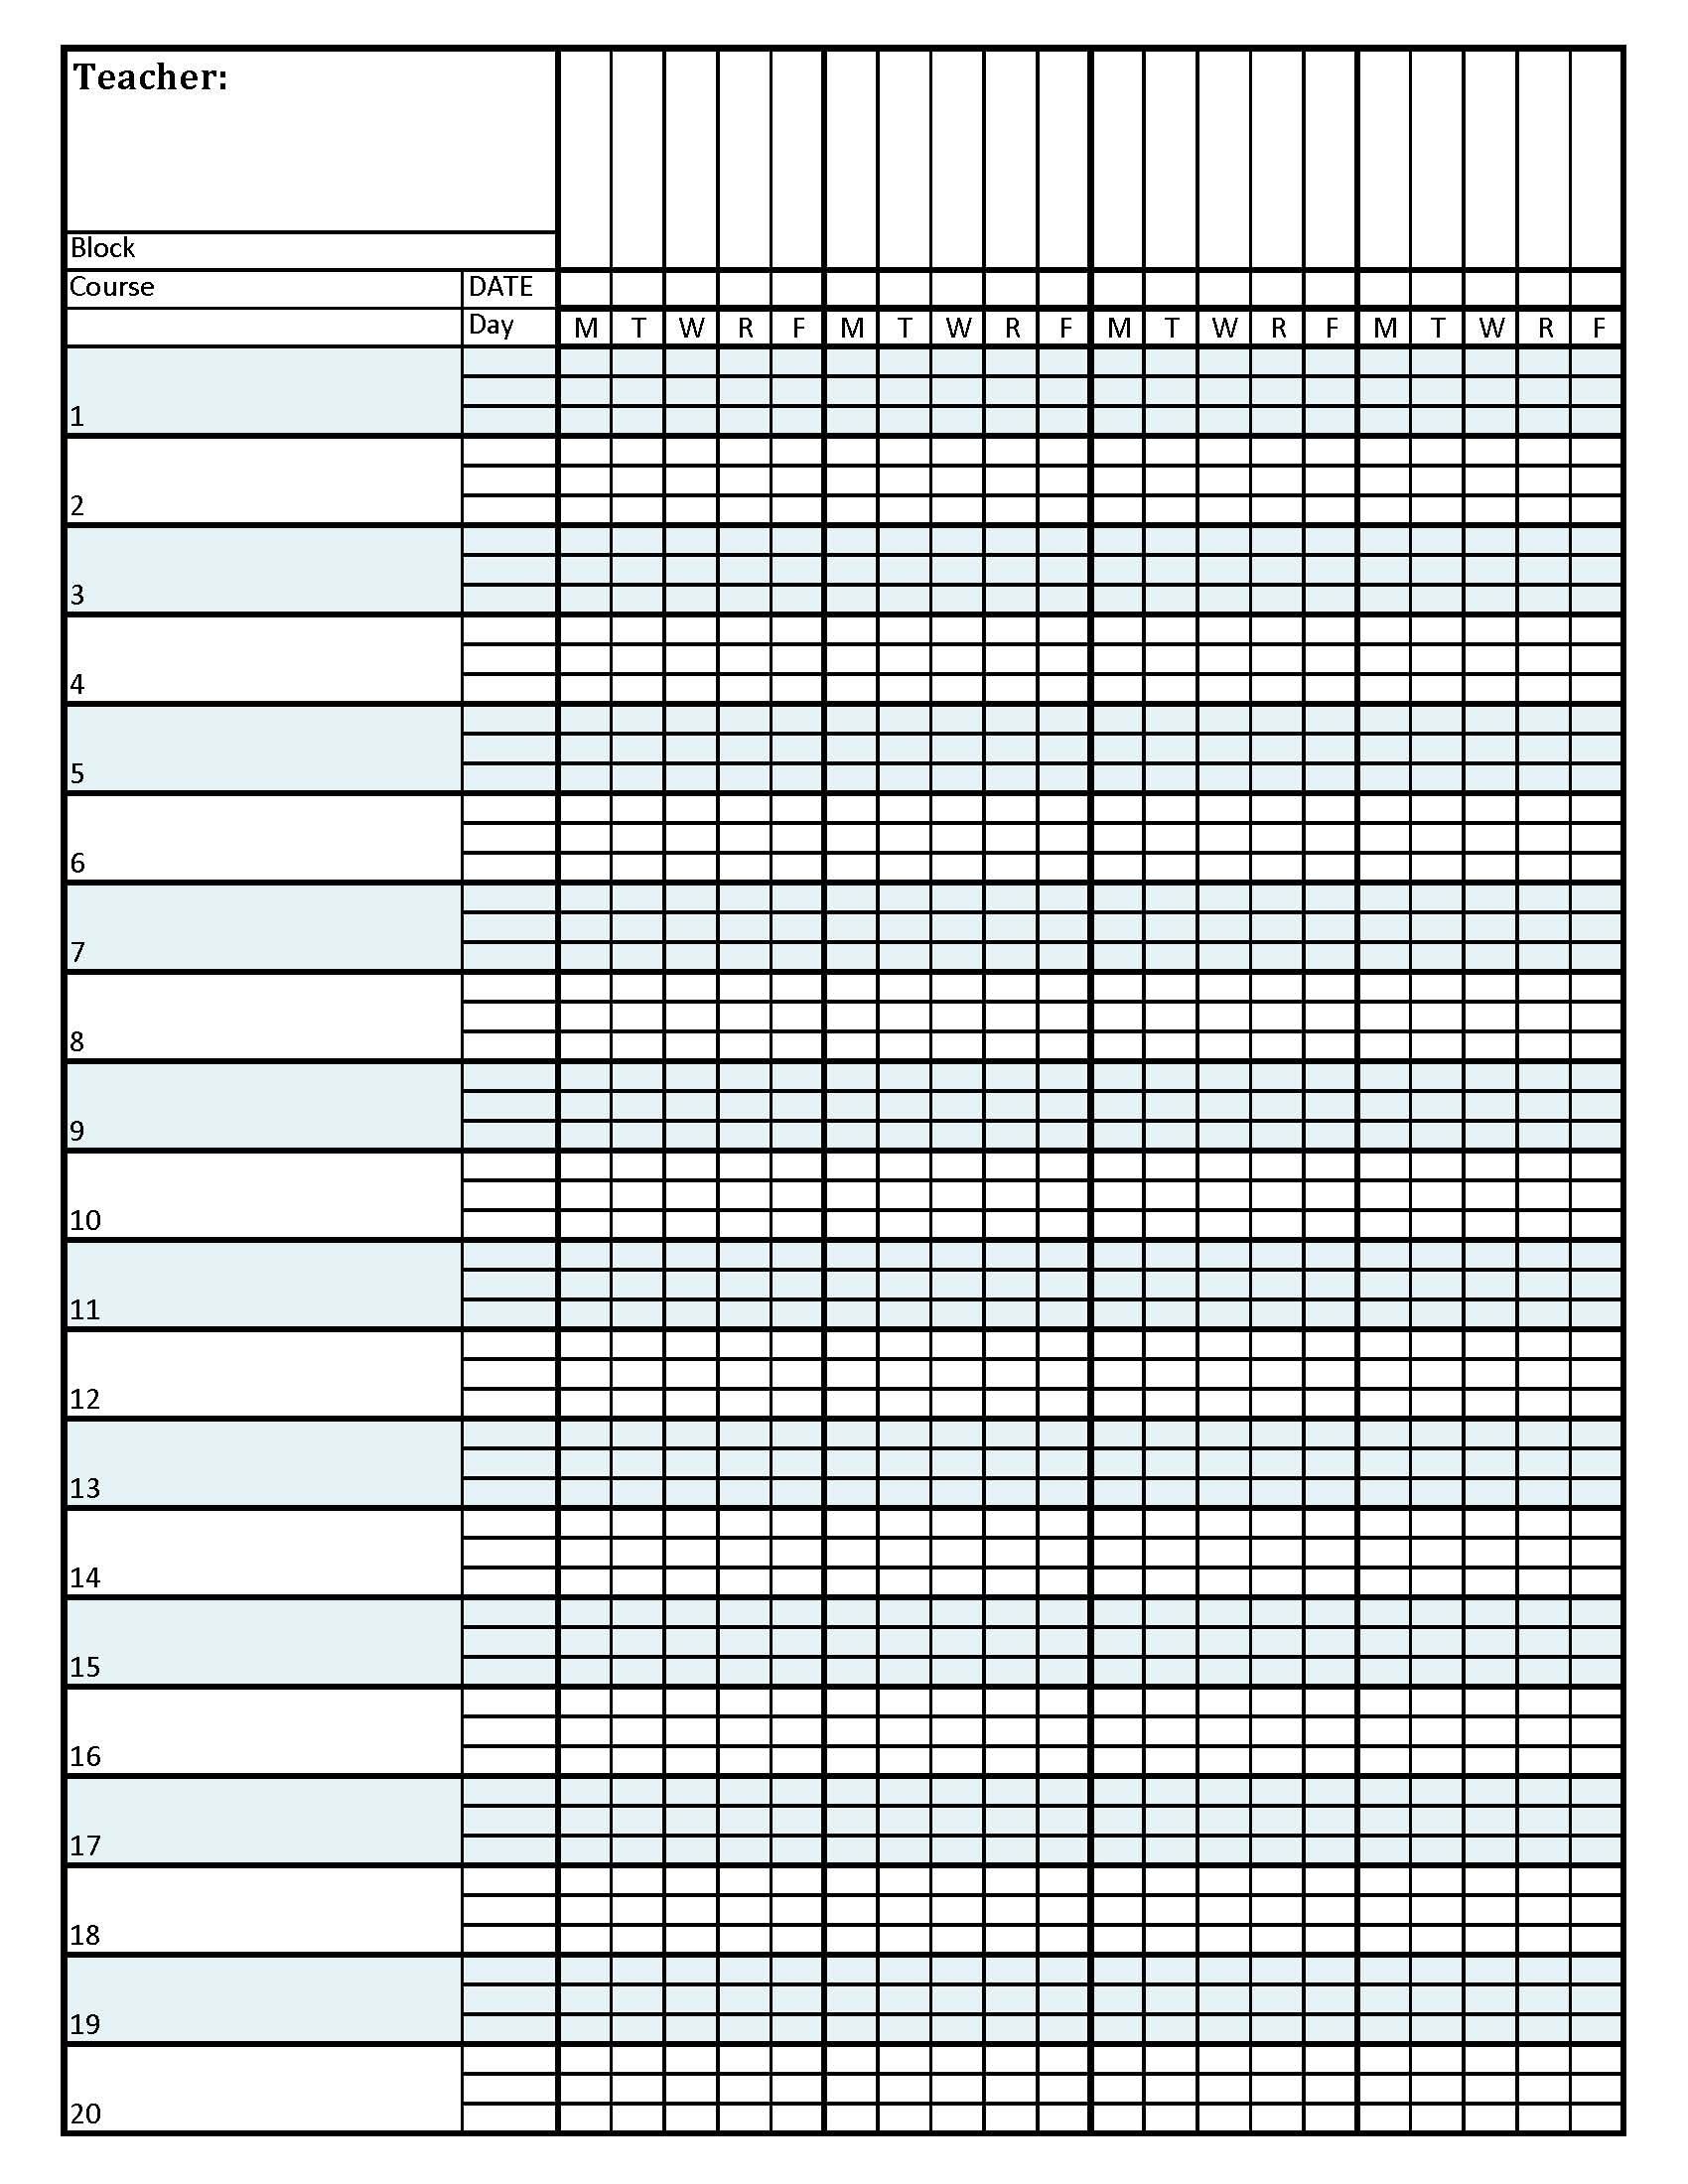 Free Printable Grade Sheet - Demir.iso-Consulting.co - Free Printable Homework Assignment Sheets